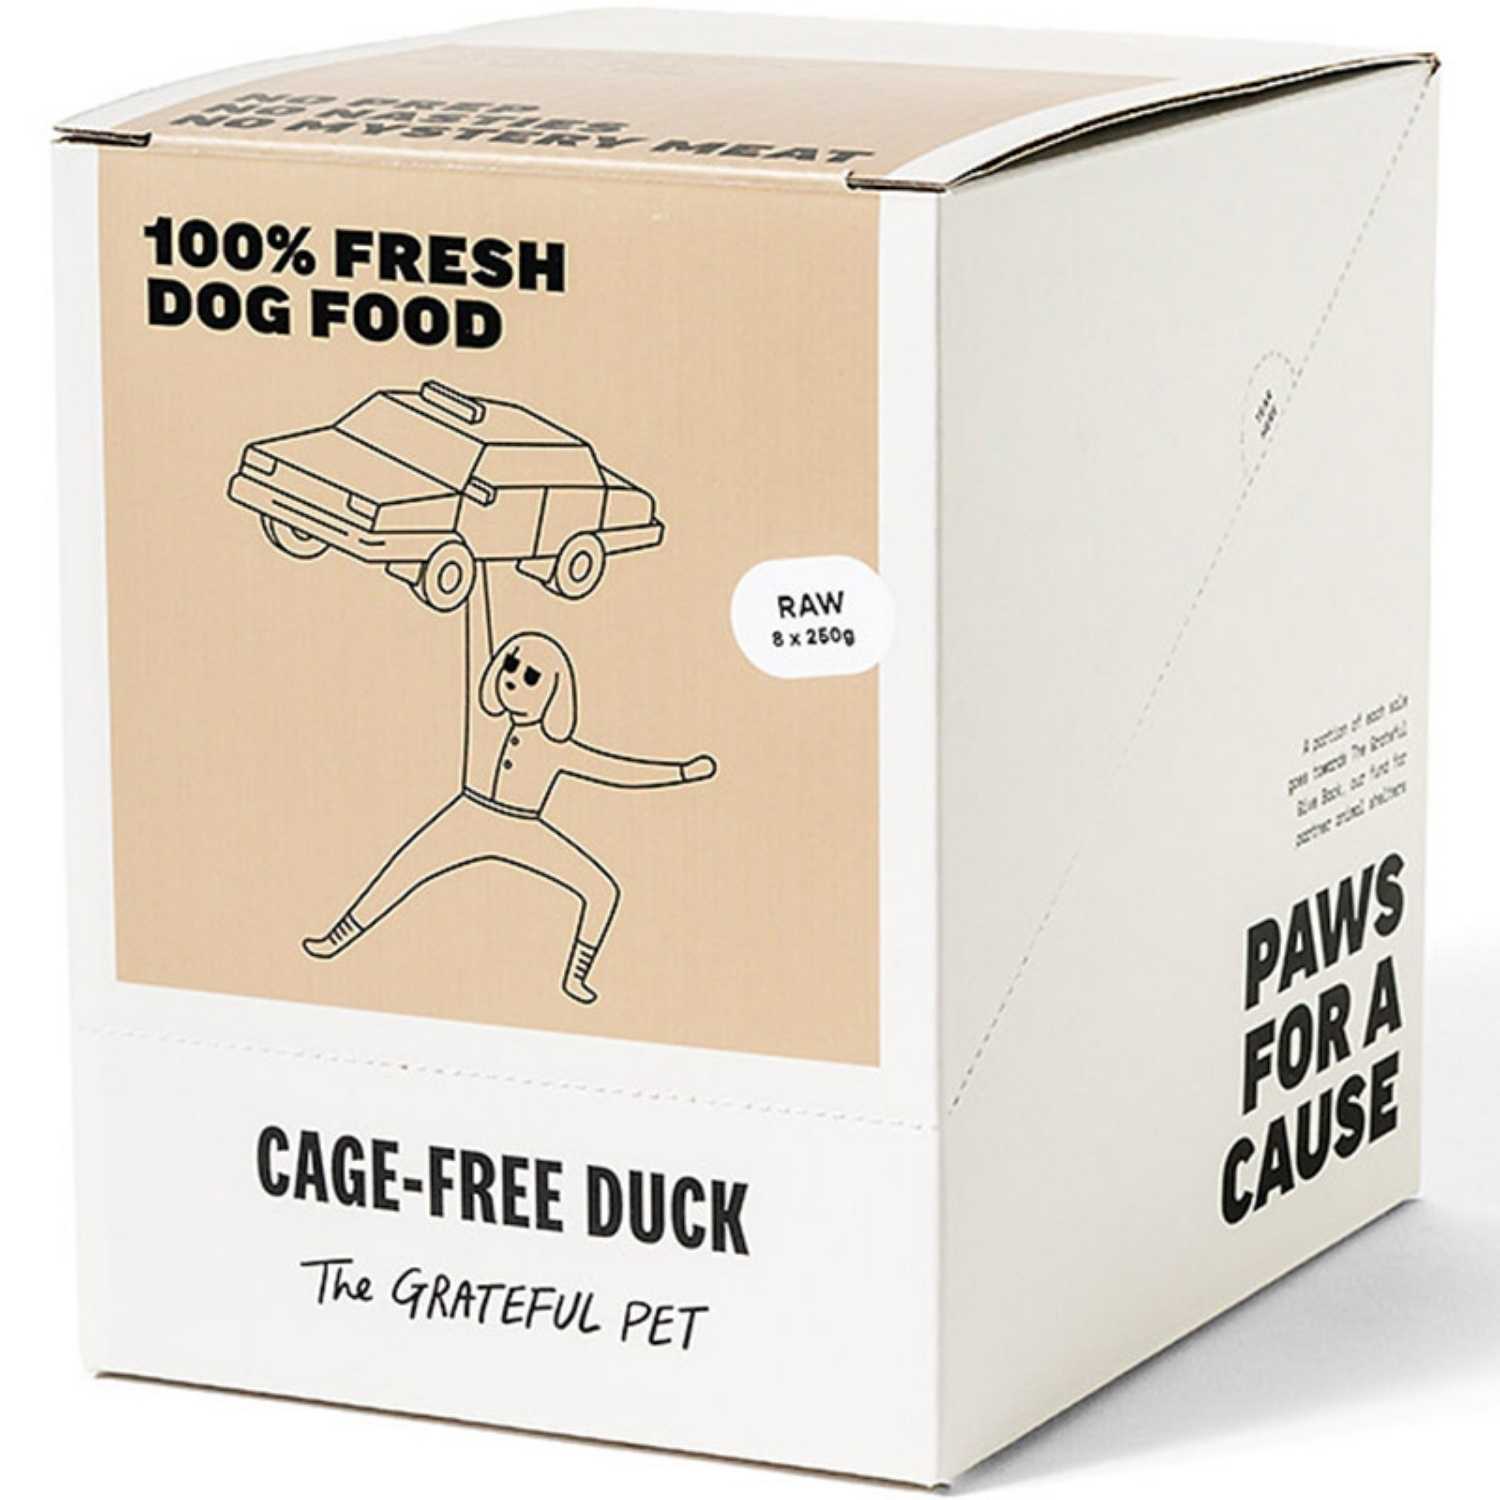 The Grateful Pet - Raw (Cage-Free Duck) - Dog (8 x 250g Pouch) Food (Case)